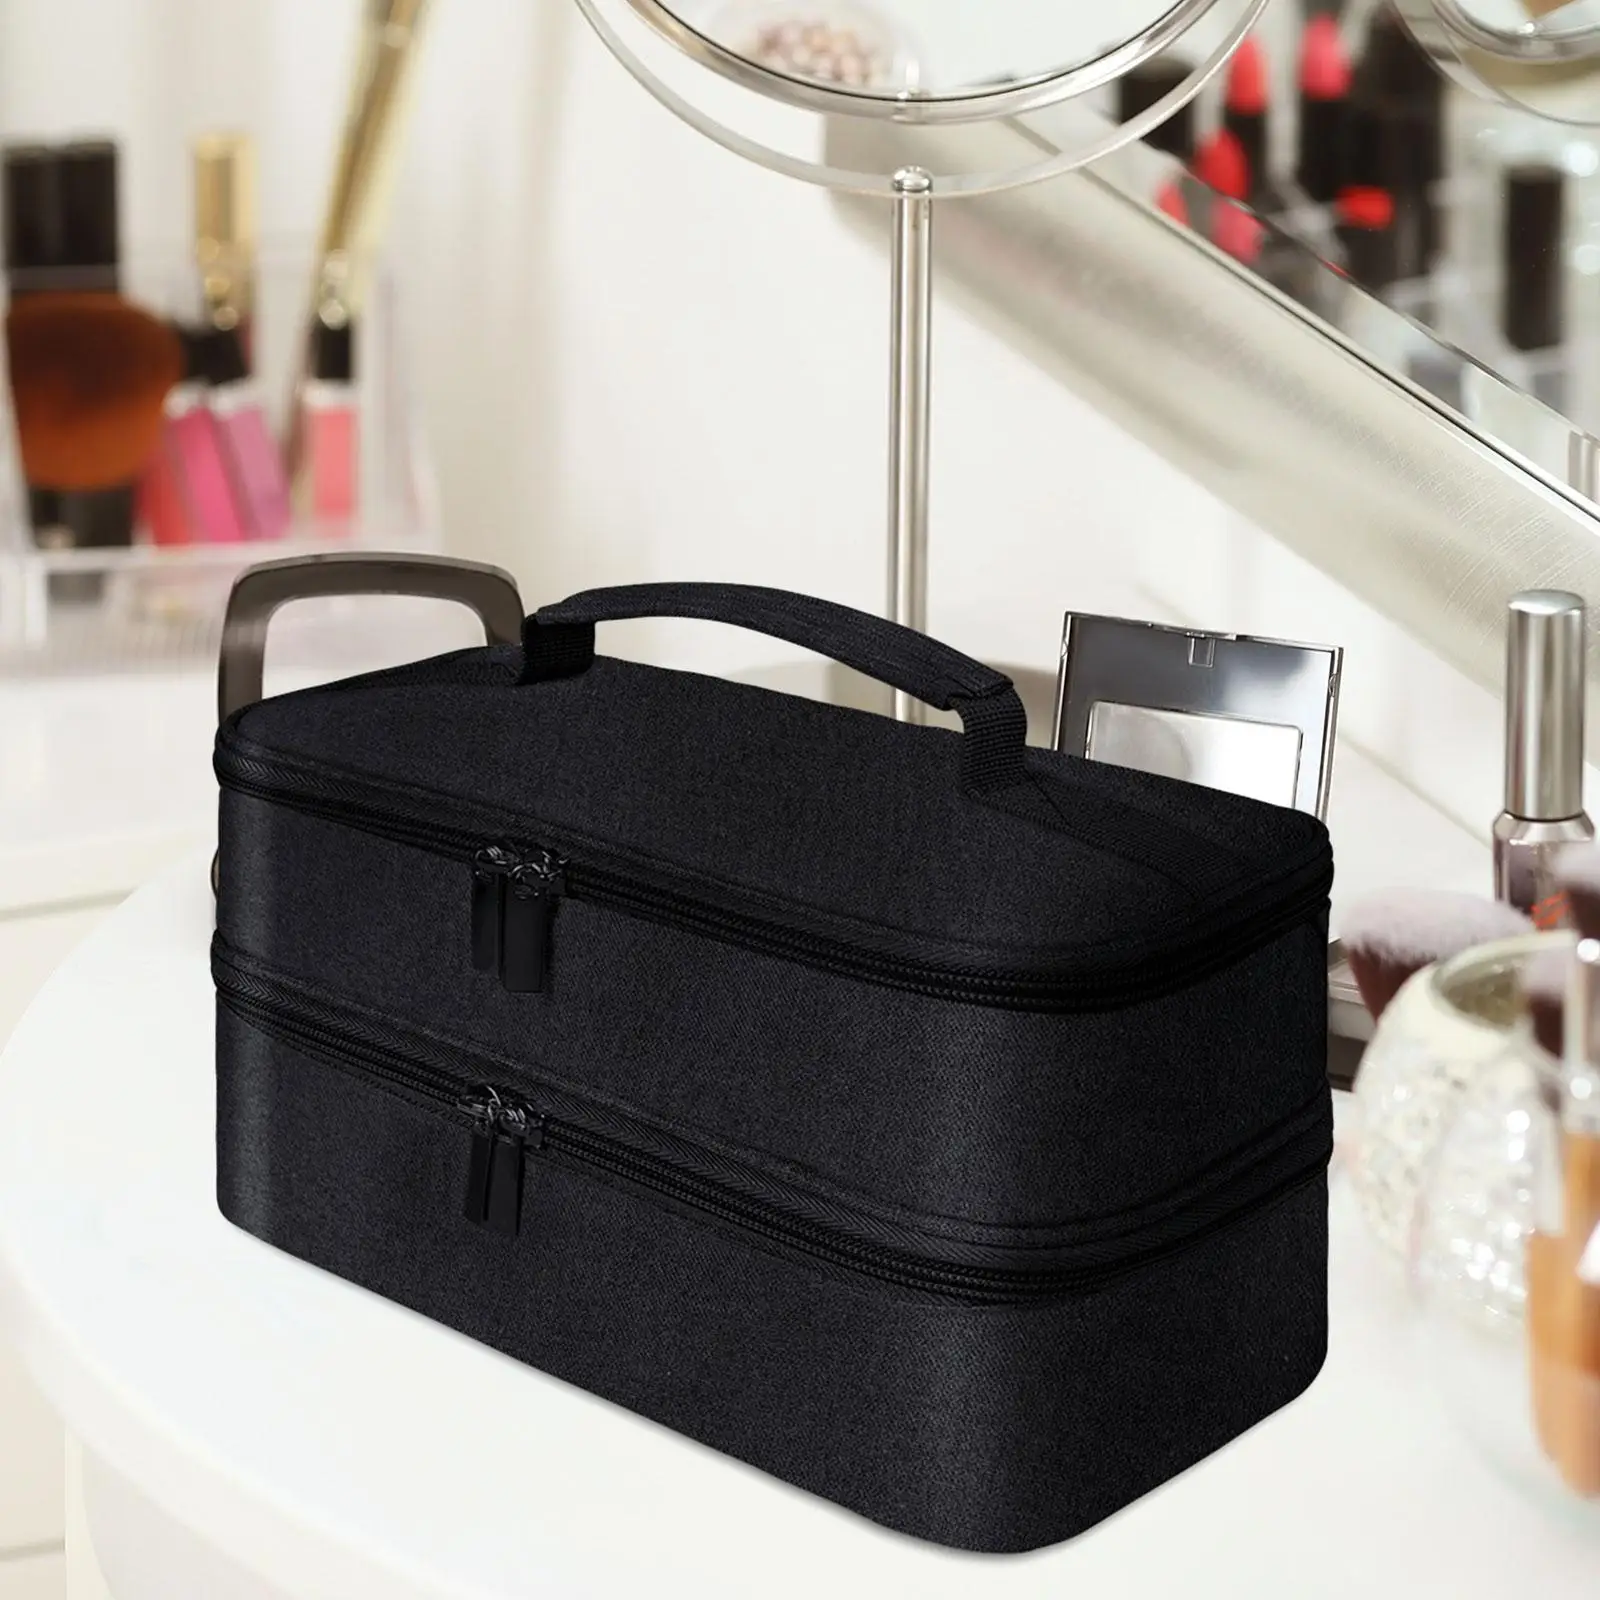 Double Layer Makeup Bag Travel Essentials with Zipper with Handle Multifunctional Waterproof Toiletry Storage Case with Dividers